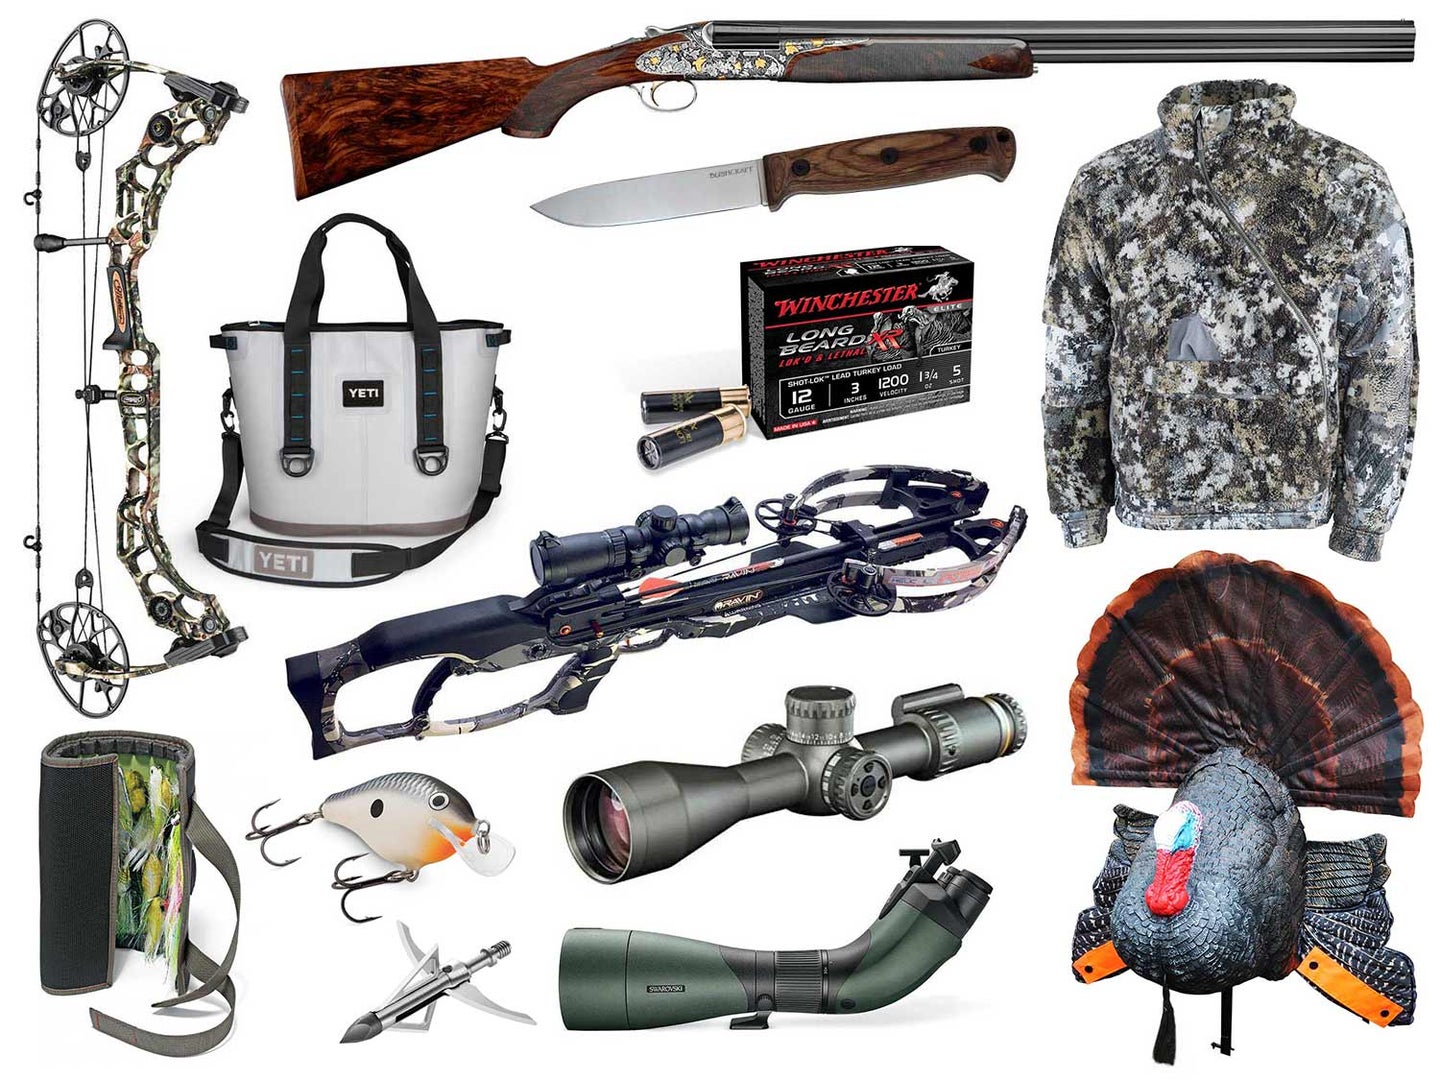 FISHING TOOLS & ACCESSORIES - Prime Time Hunting